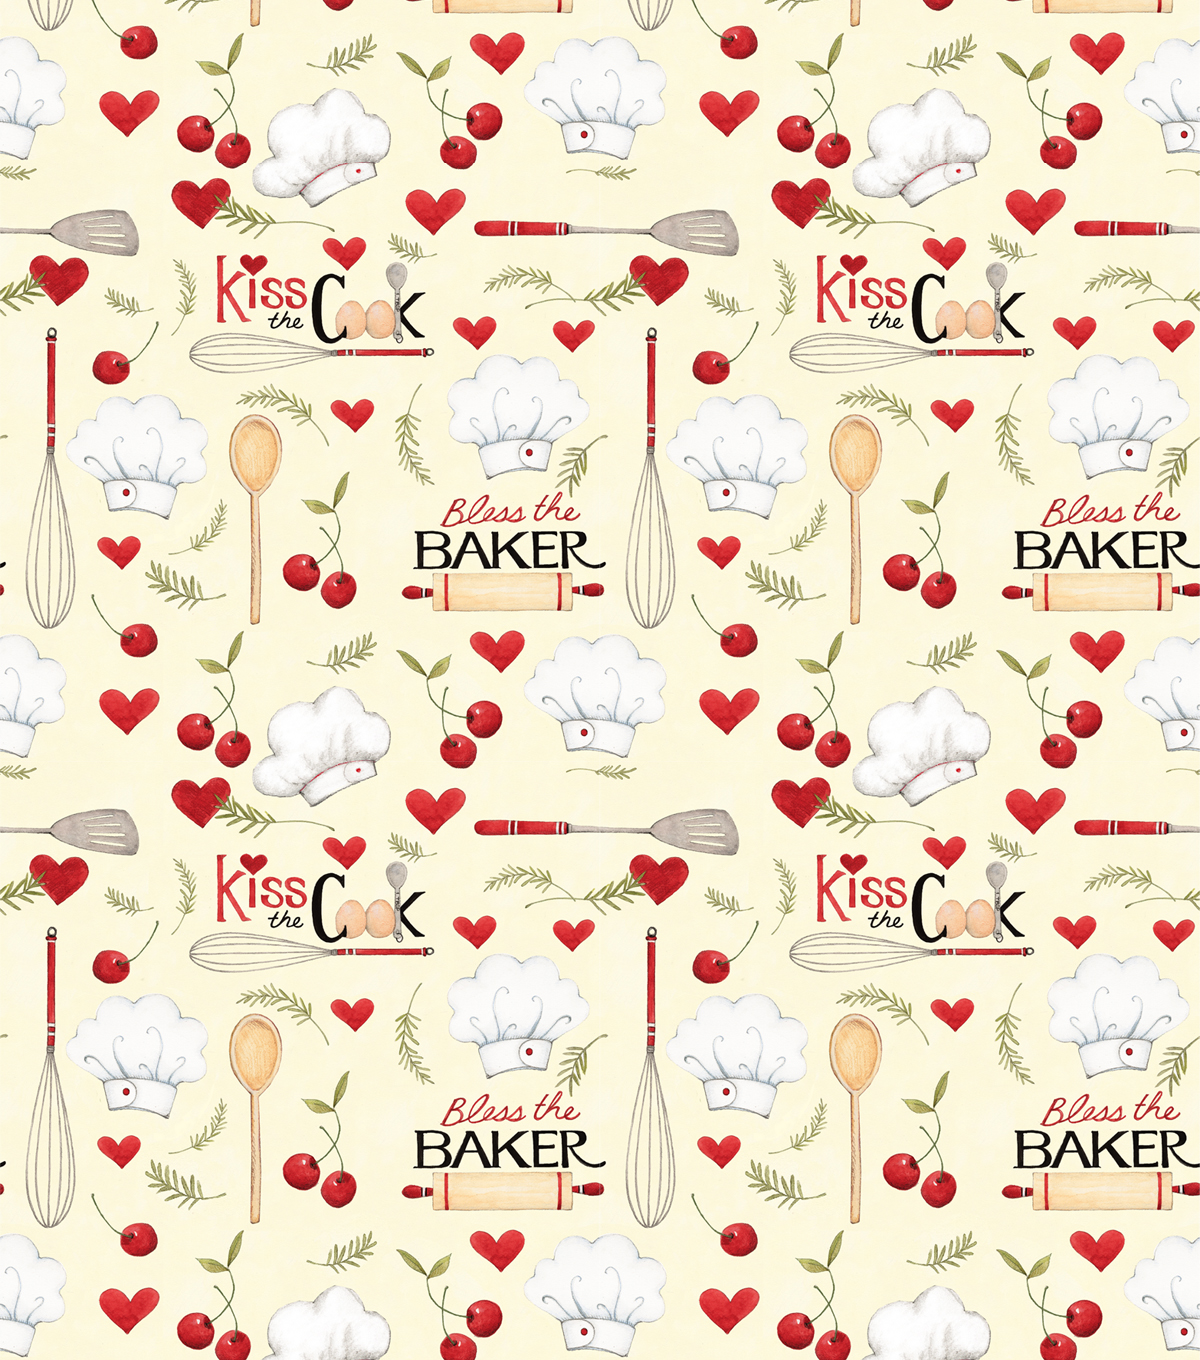 Springs Creative 44" x 36" Cotton Bless The Baker Precut Sewing & Craft Fabric, Cream - image 2 of 3